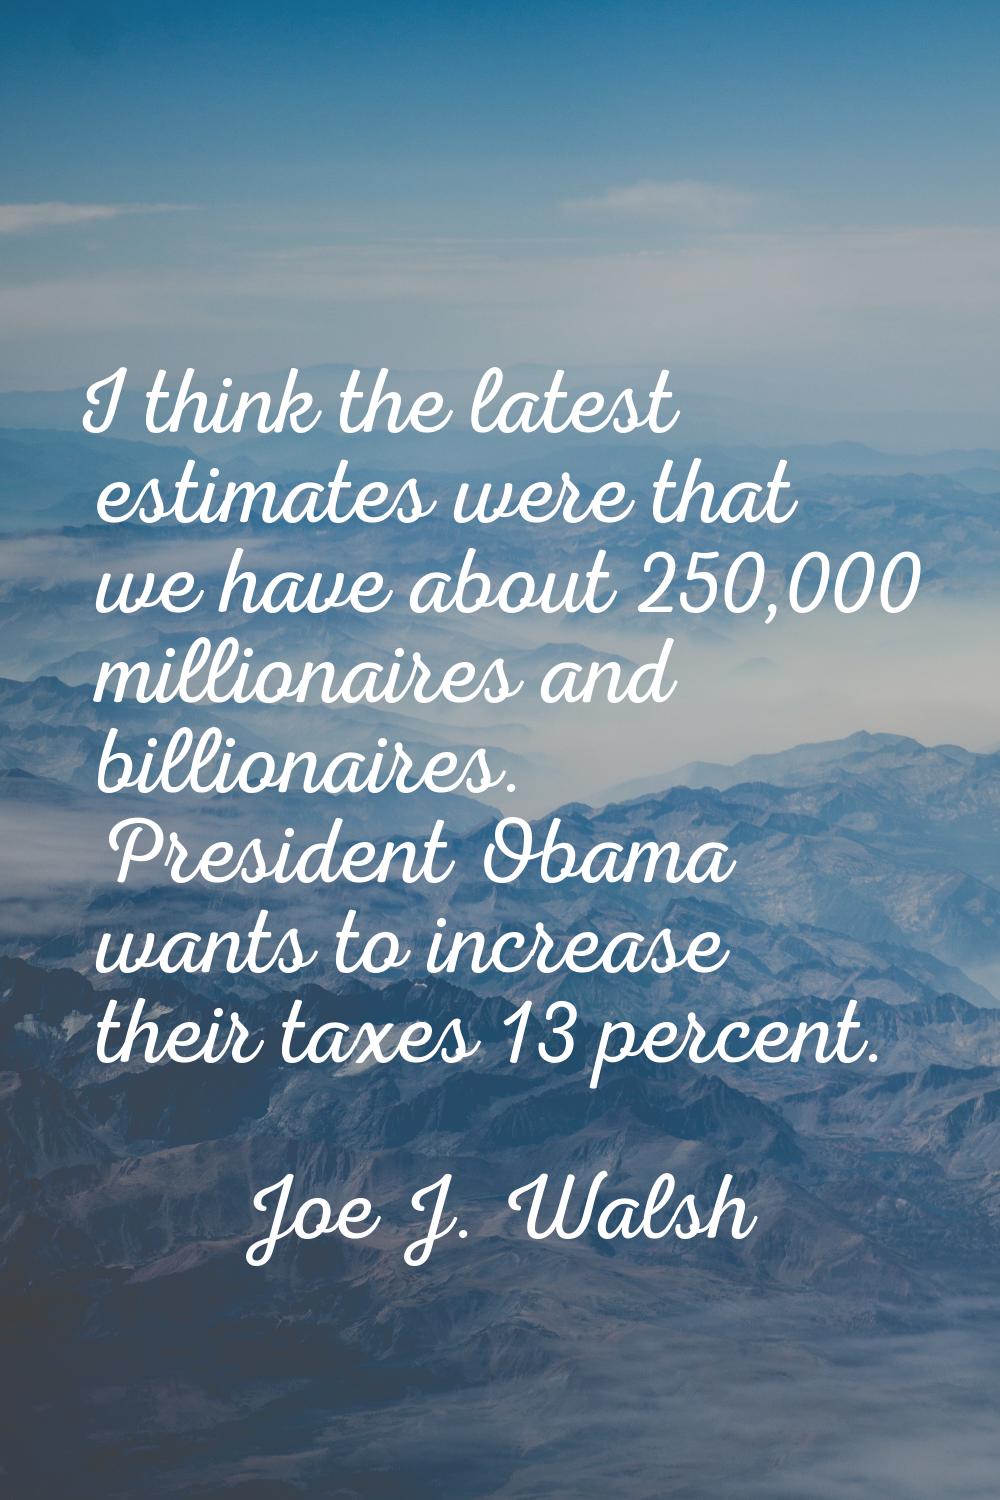 I think the latest estimates were that we have about 250,000 millionaires and billionaires. Preside